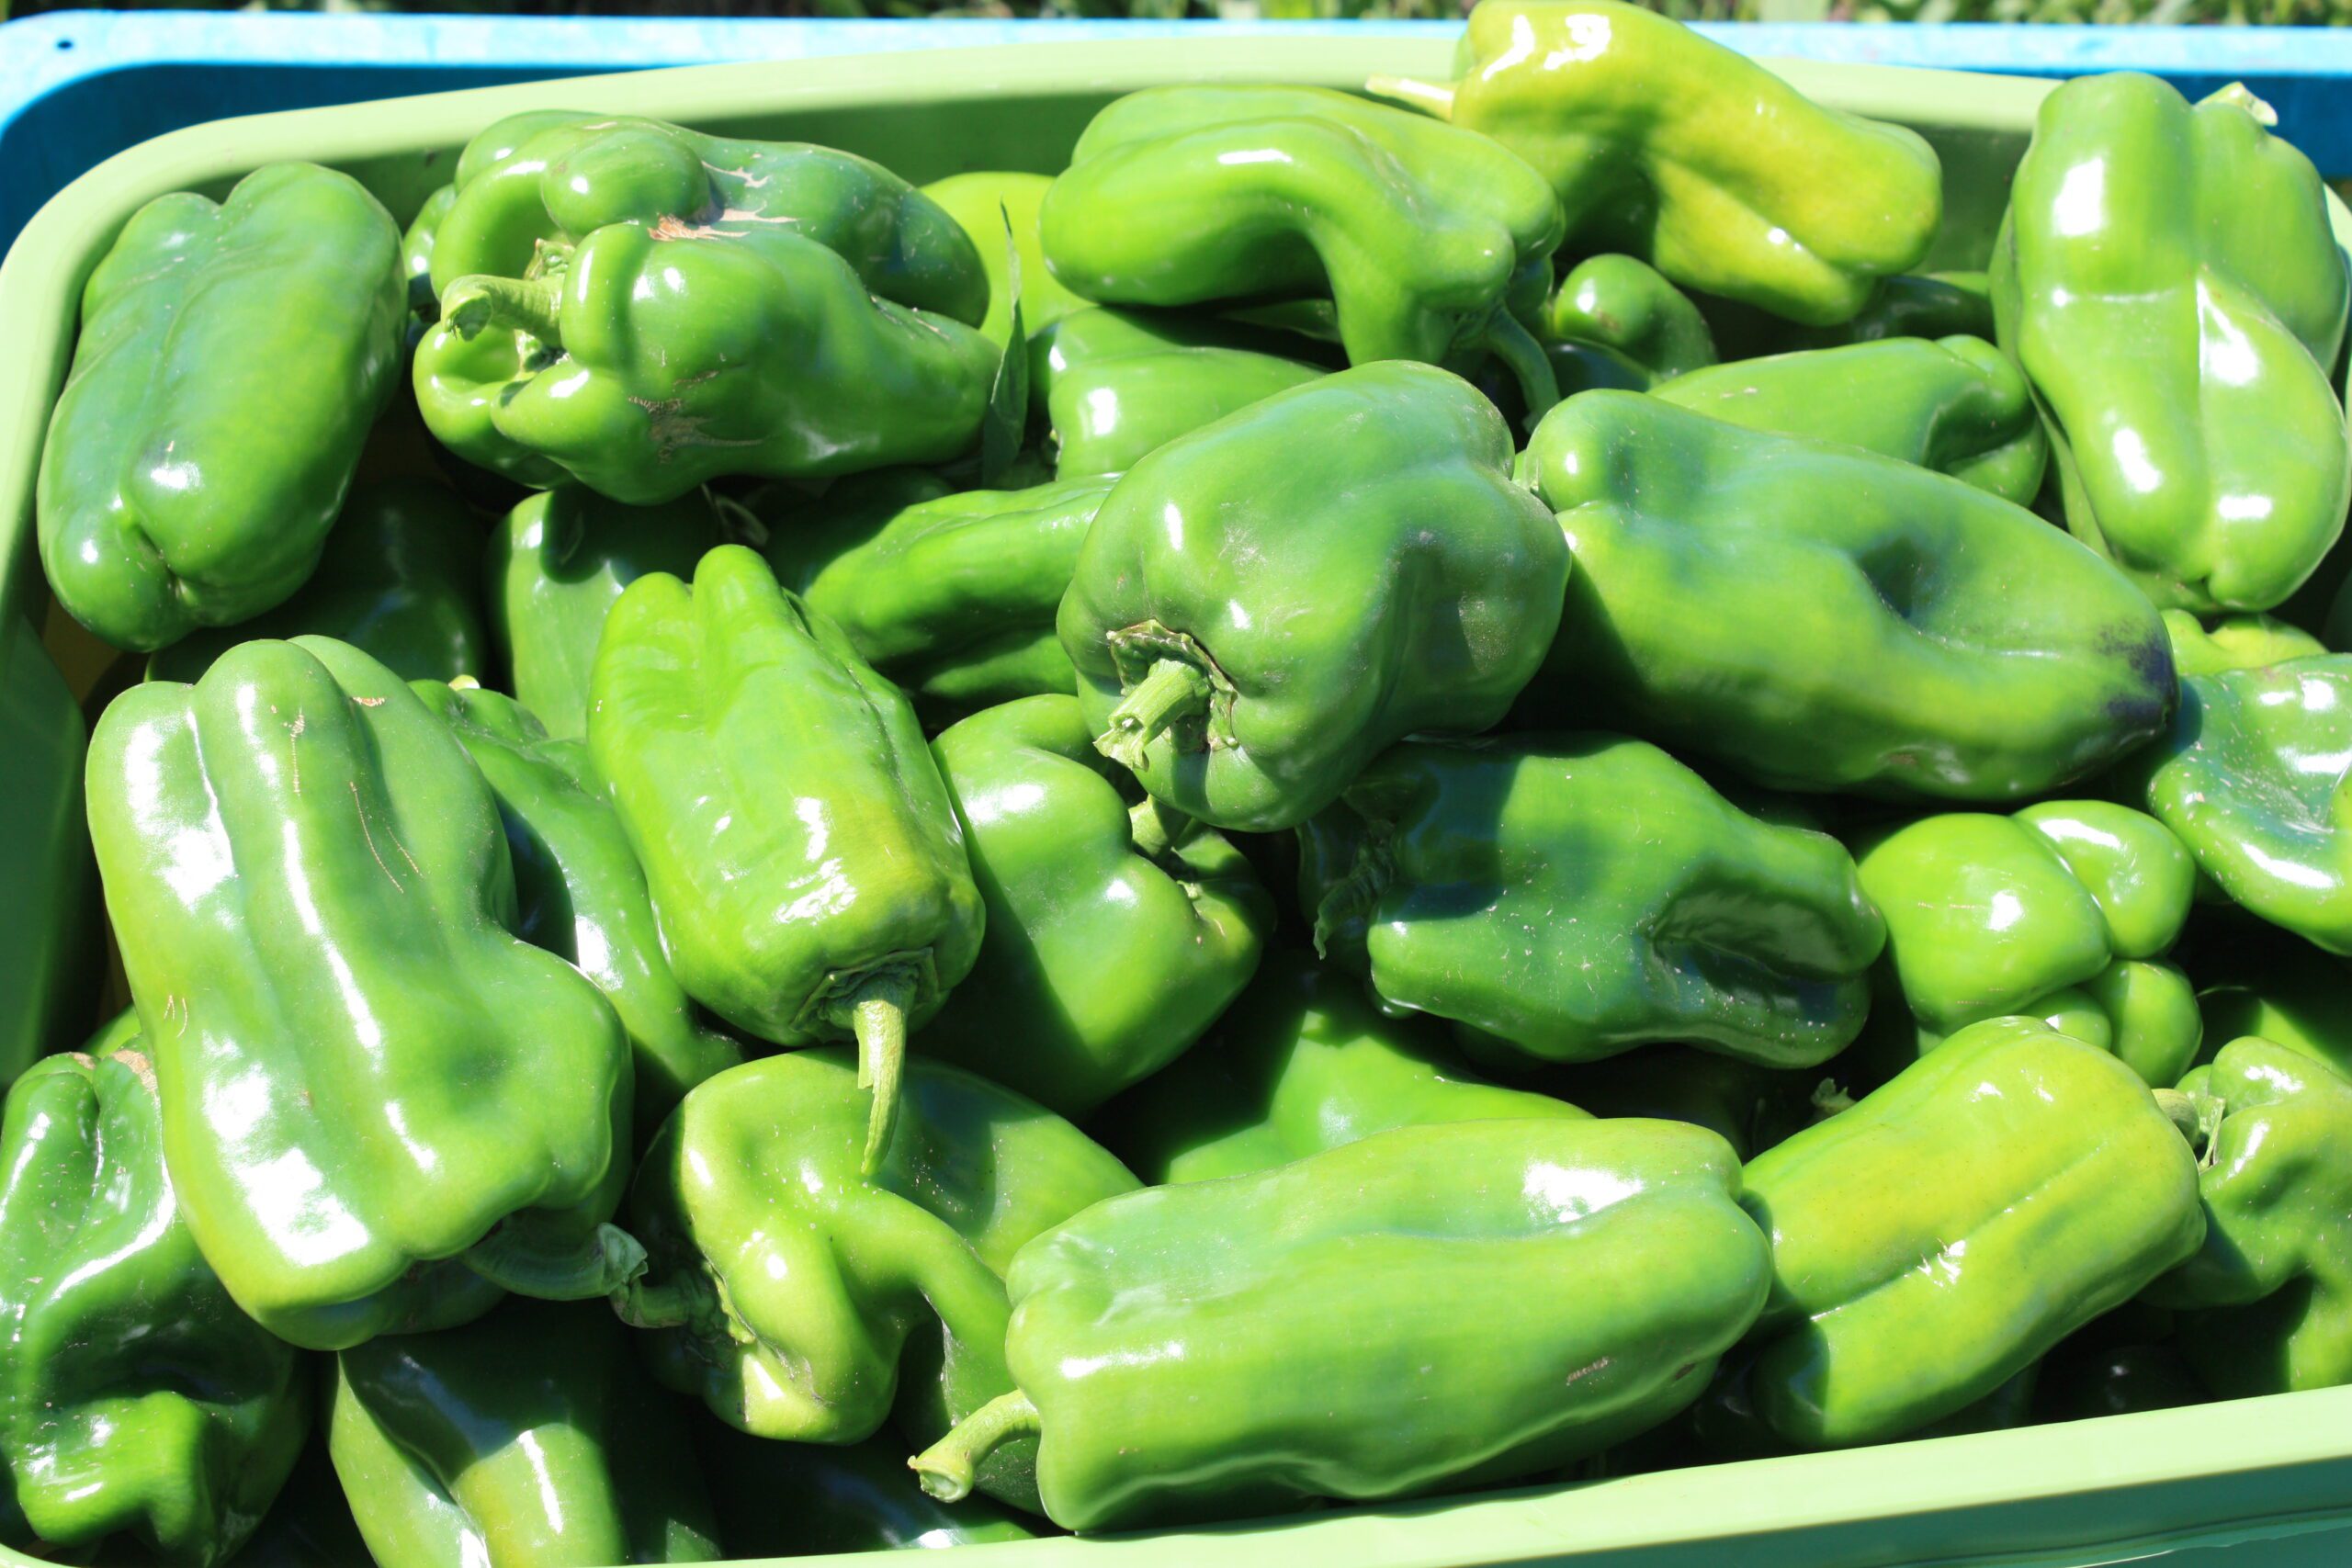 Container with bell peppers before dicamba